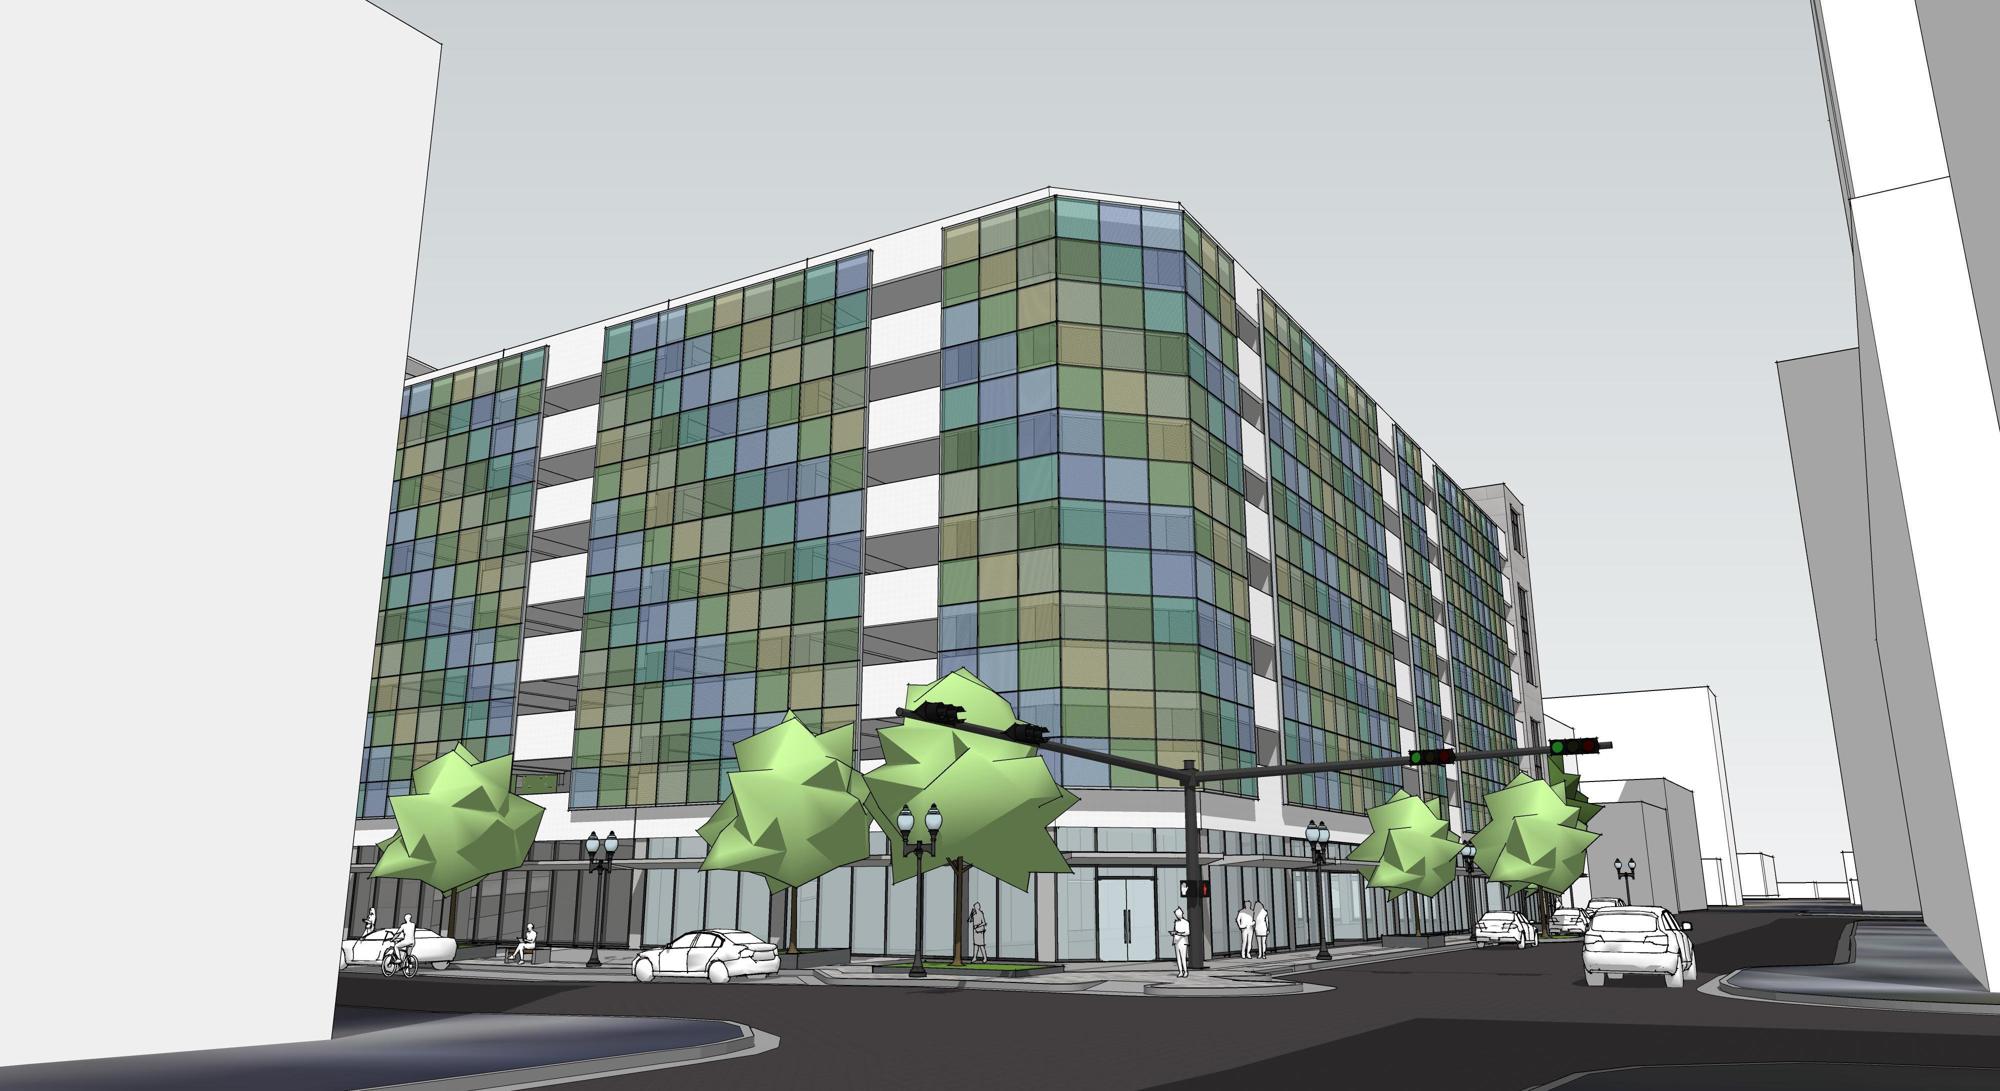 The JEA HQ parking structure’s corners are now rounded in the latest plans.